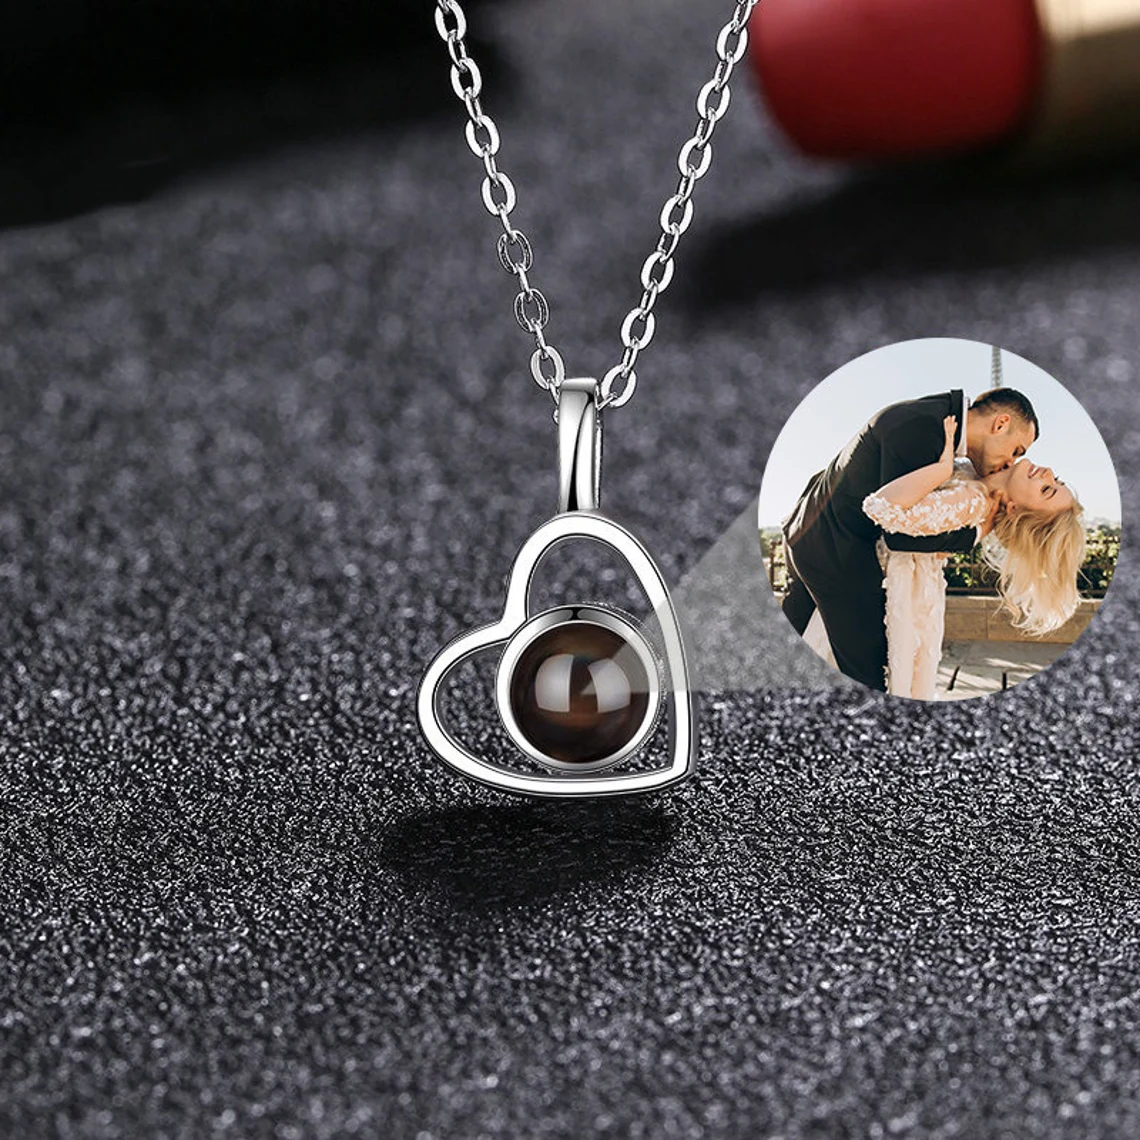 Peraonalized Love Heart Projection Necklace With Picture Inside